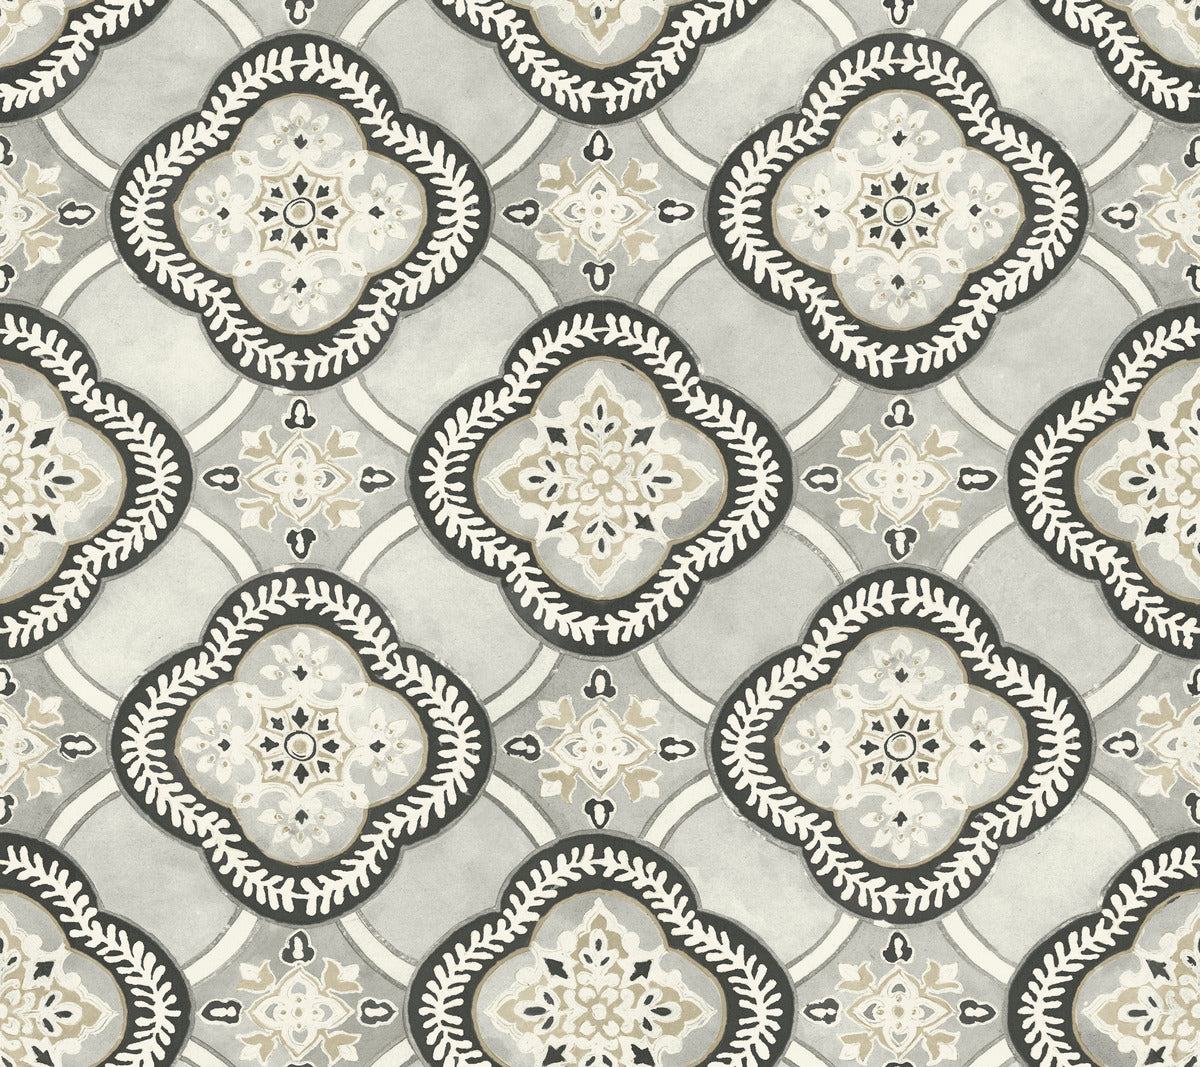 A seamless pattern featuring intricate, symmetrical, floral-like designs within interlocking diamond shapes. The pattern consists of shades of grey, black, white, and beige, creating a visually appealing and elegant look reminiscent of vintage tile work—a perfect choice for removable wallpaper like the Garden Trellis Cobalt Wallpaper Blue (60 Sq.Ft.) from York Wallcoverings with botanical elegance.